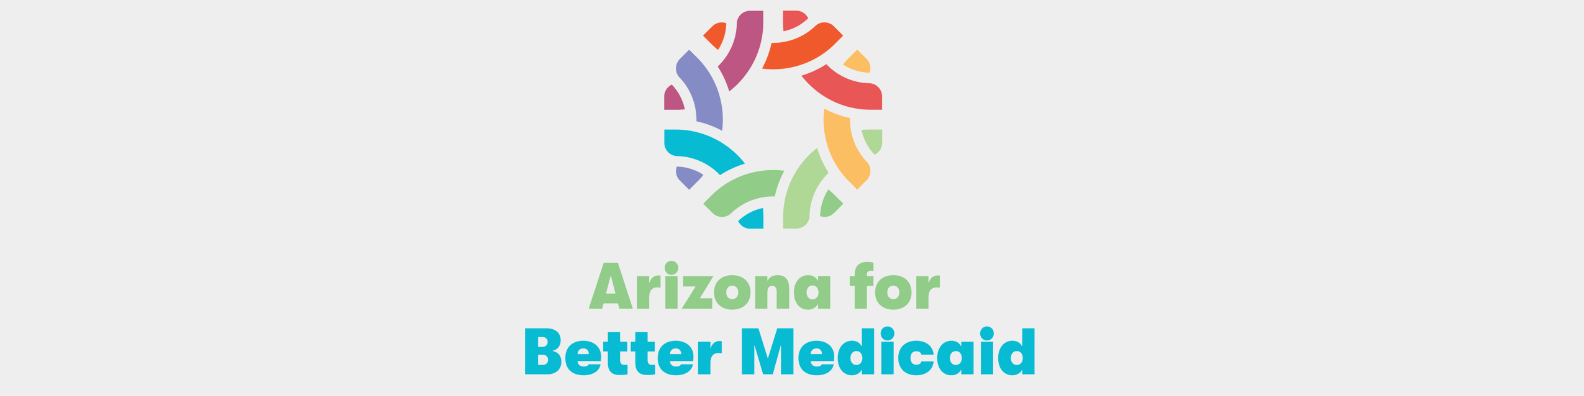 Majority of Caregivers for Arizonans with Intellectual and Developmental Disabilities Support a Medicaid Managed Care Option